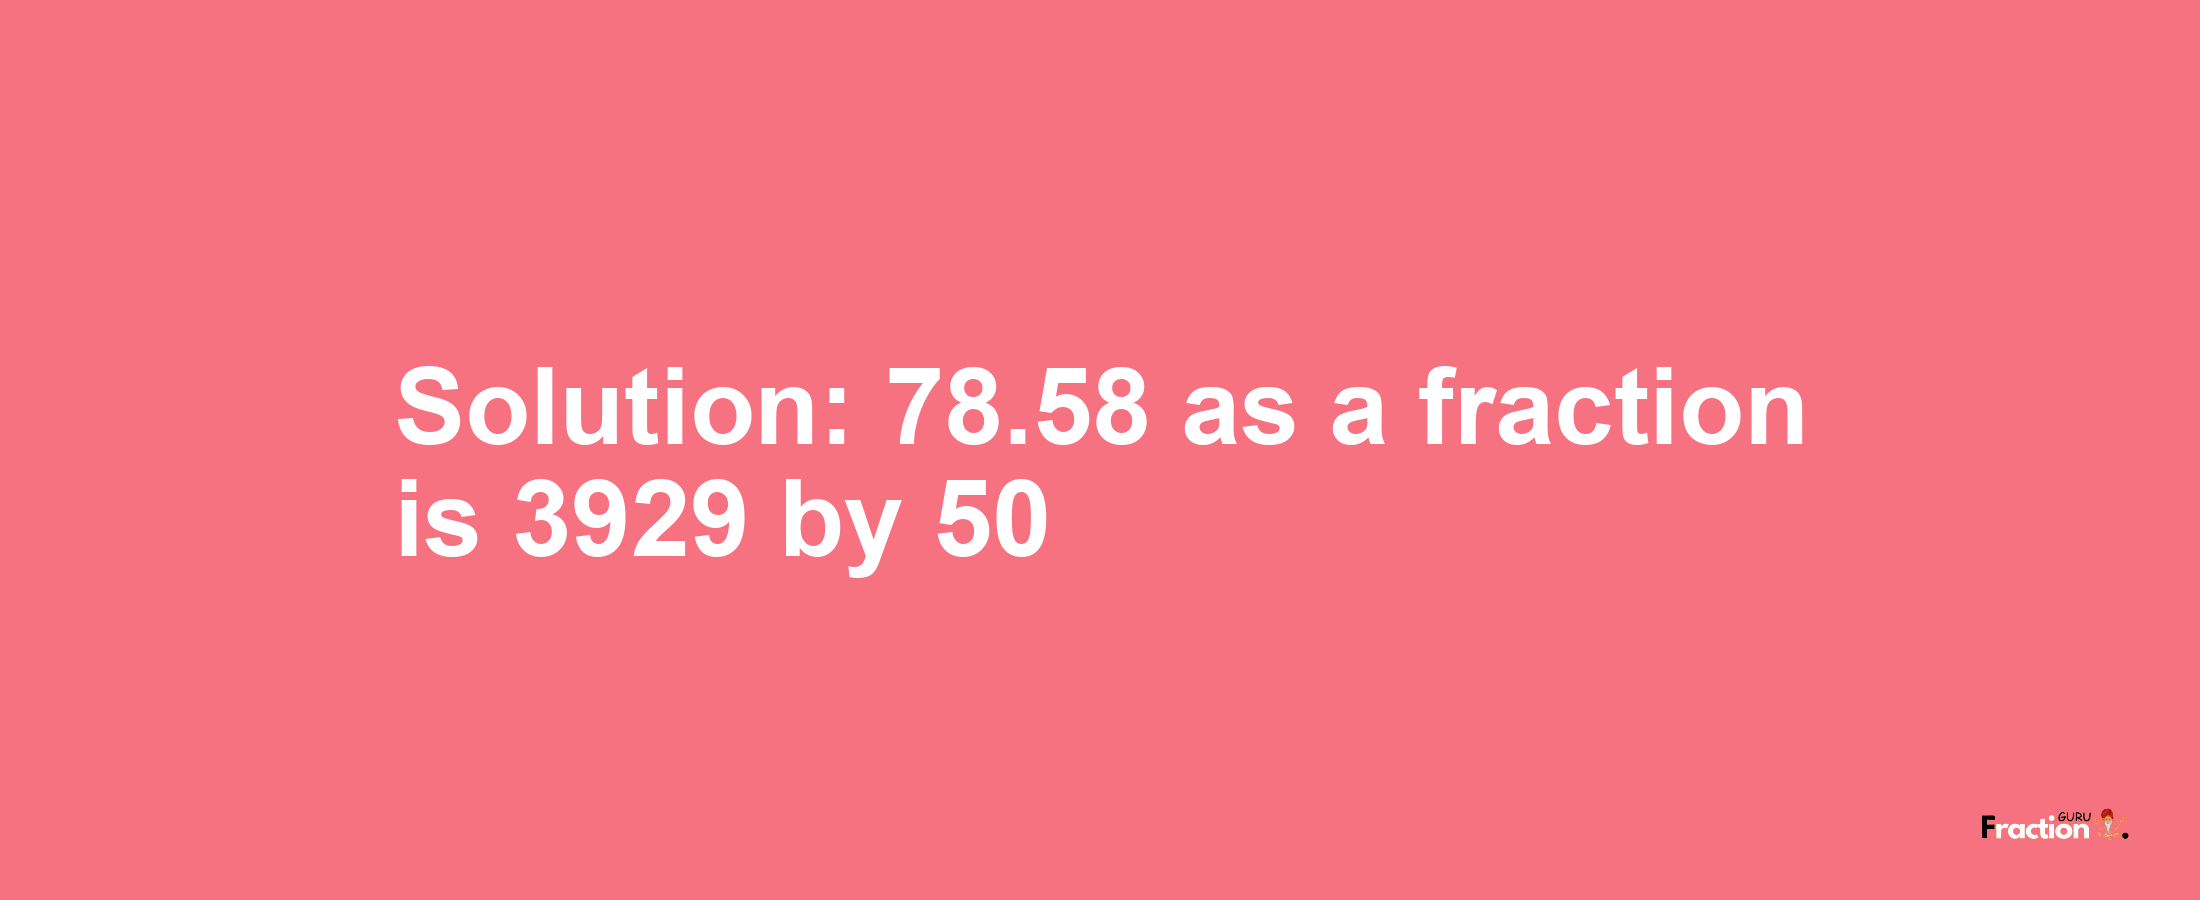 Solution:78.58 as a fraction is 3929/50